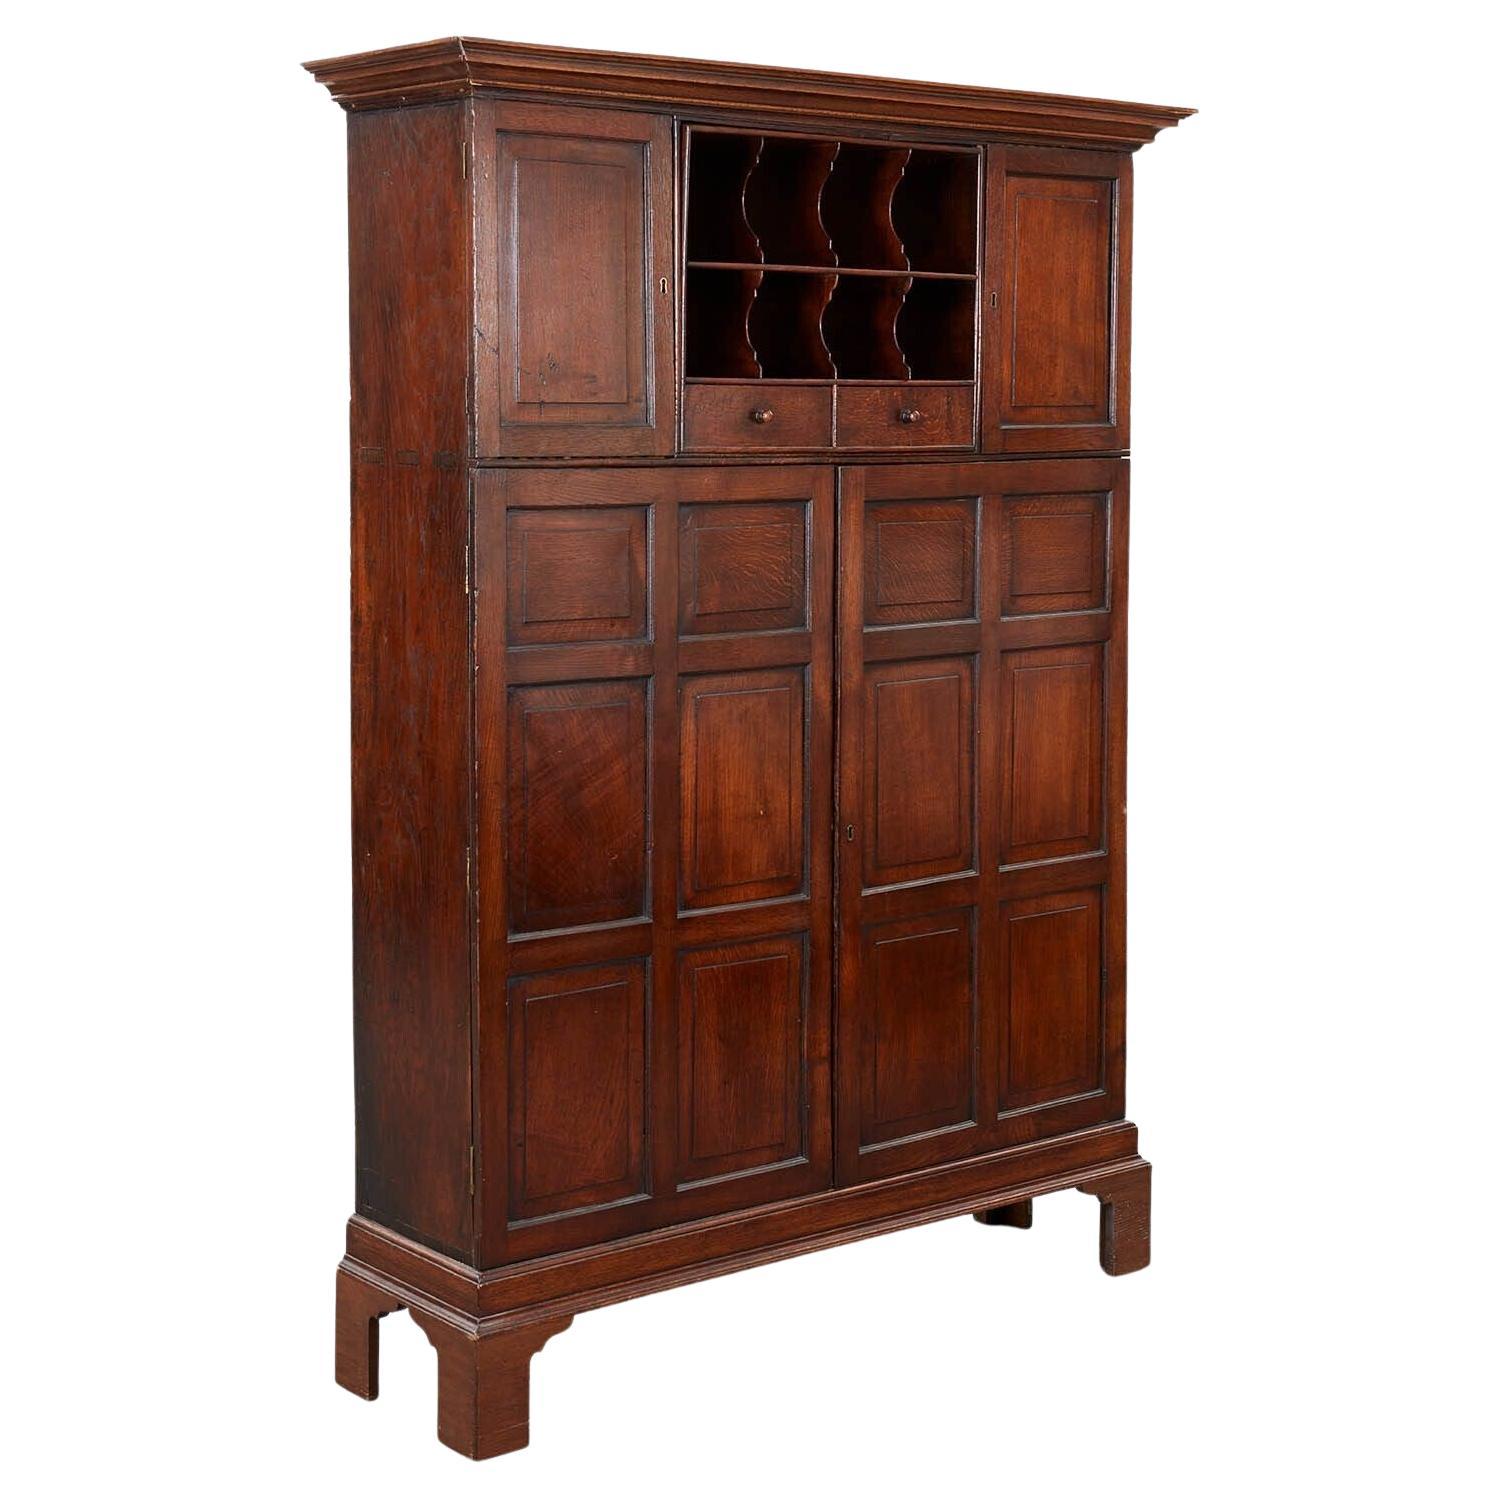 English Country House Estate Cabinet